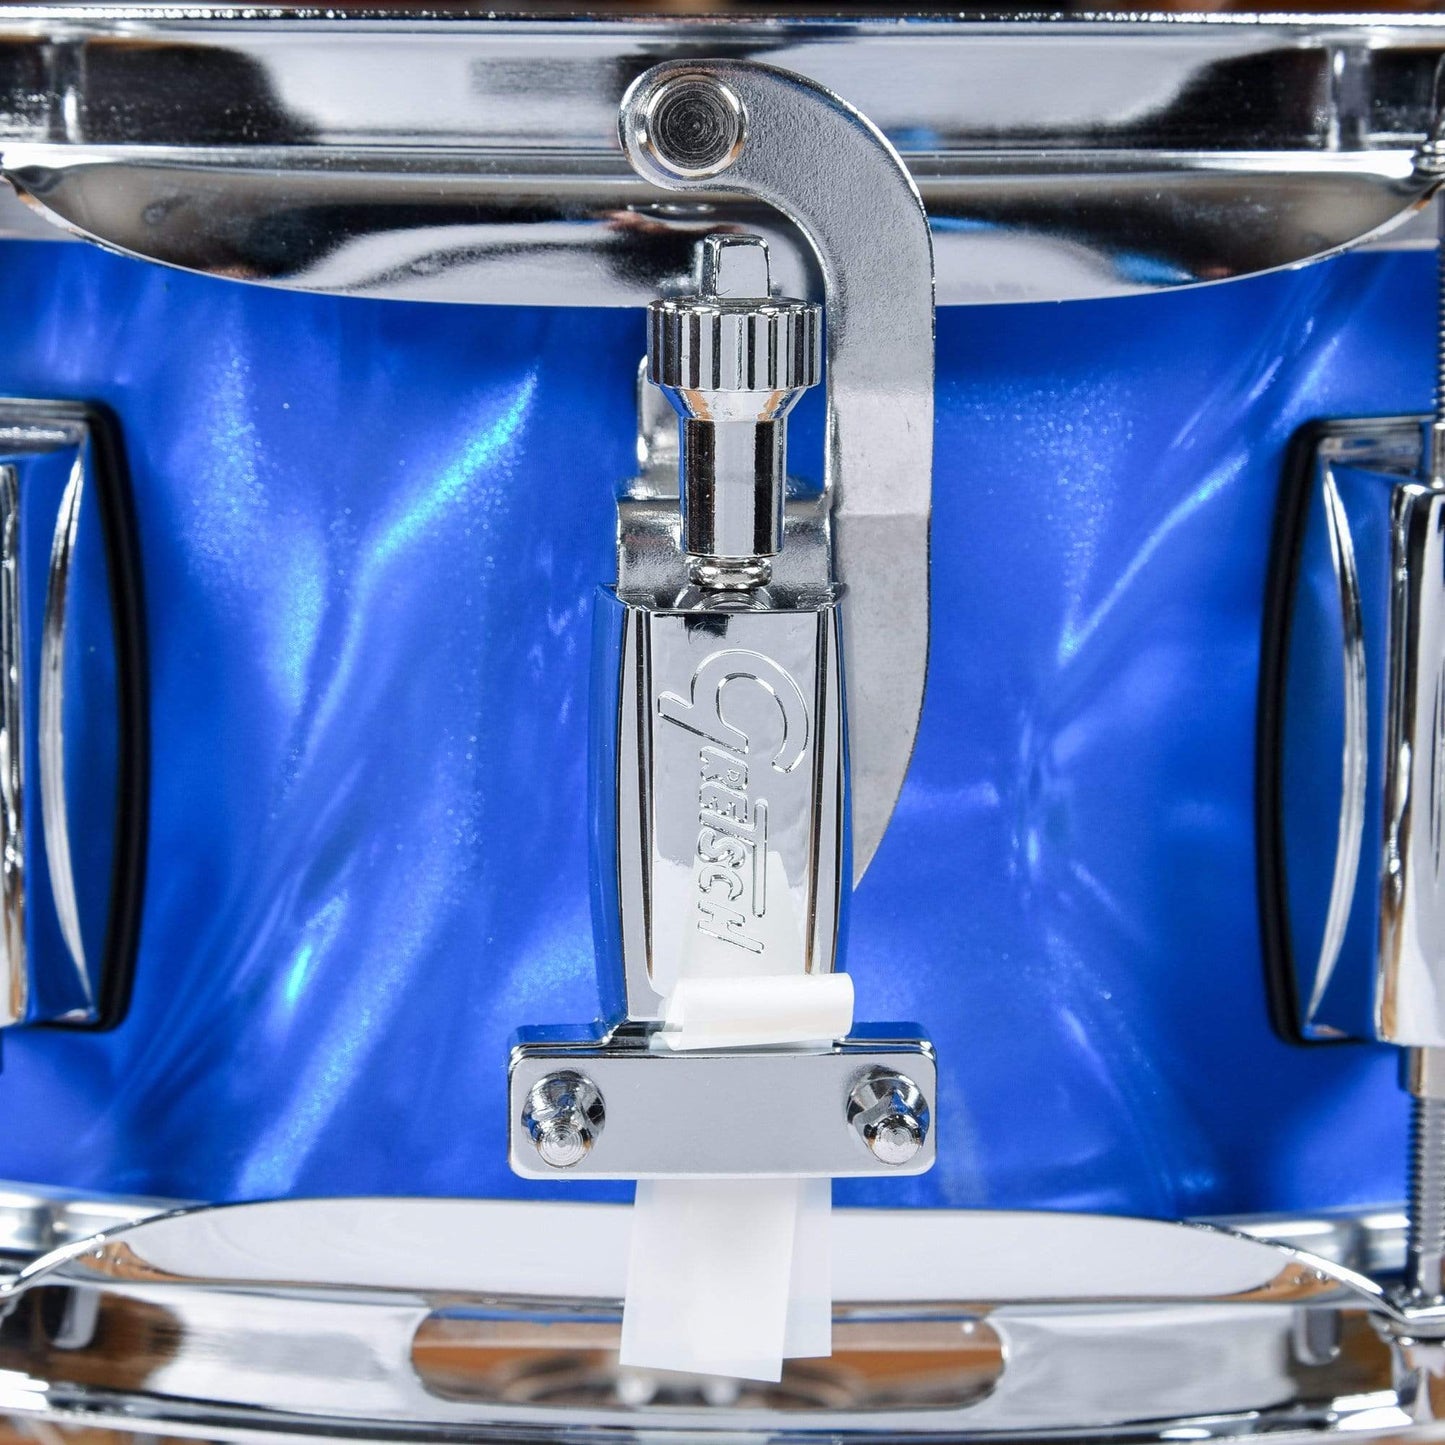 Gretsch Catalina Club 12/14/18/5x14 4pc. Drum Kit Blue Satin Flame Drums and Percussion / Acoustic Drums / Full Acoustic Kits